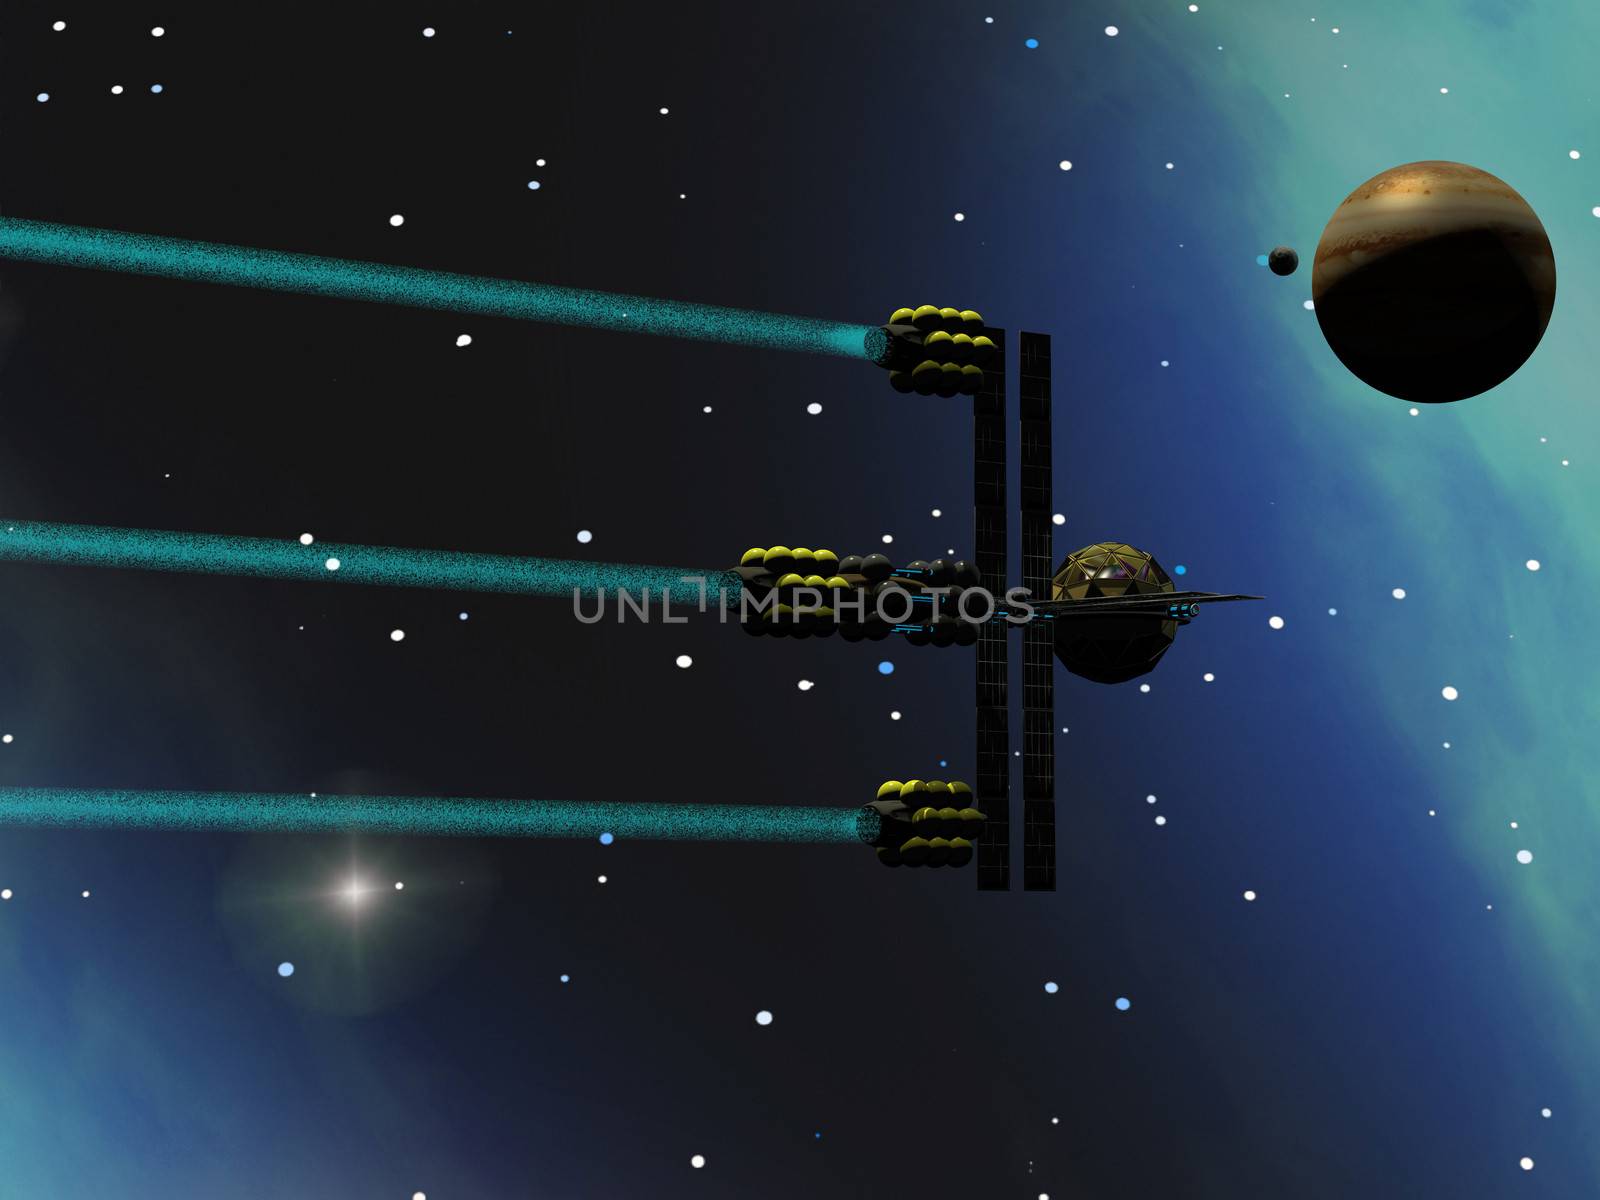 A star-ship from Earth with ion drive propulsion explores the cosmos.